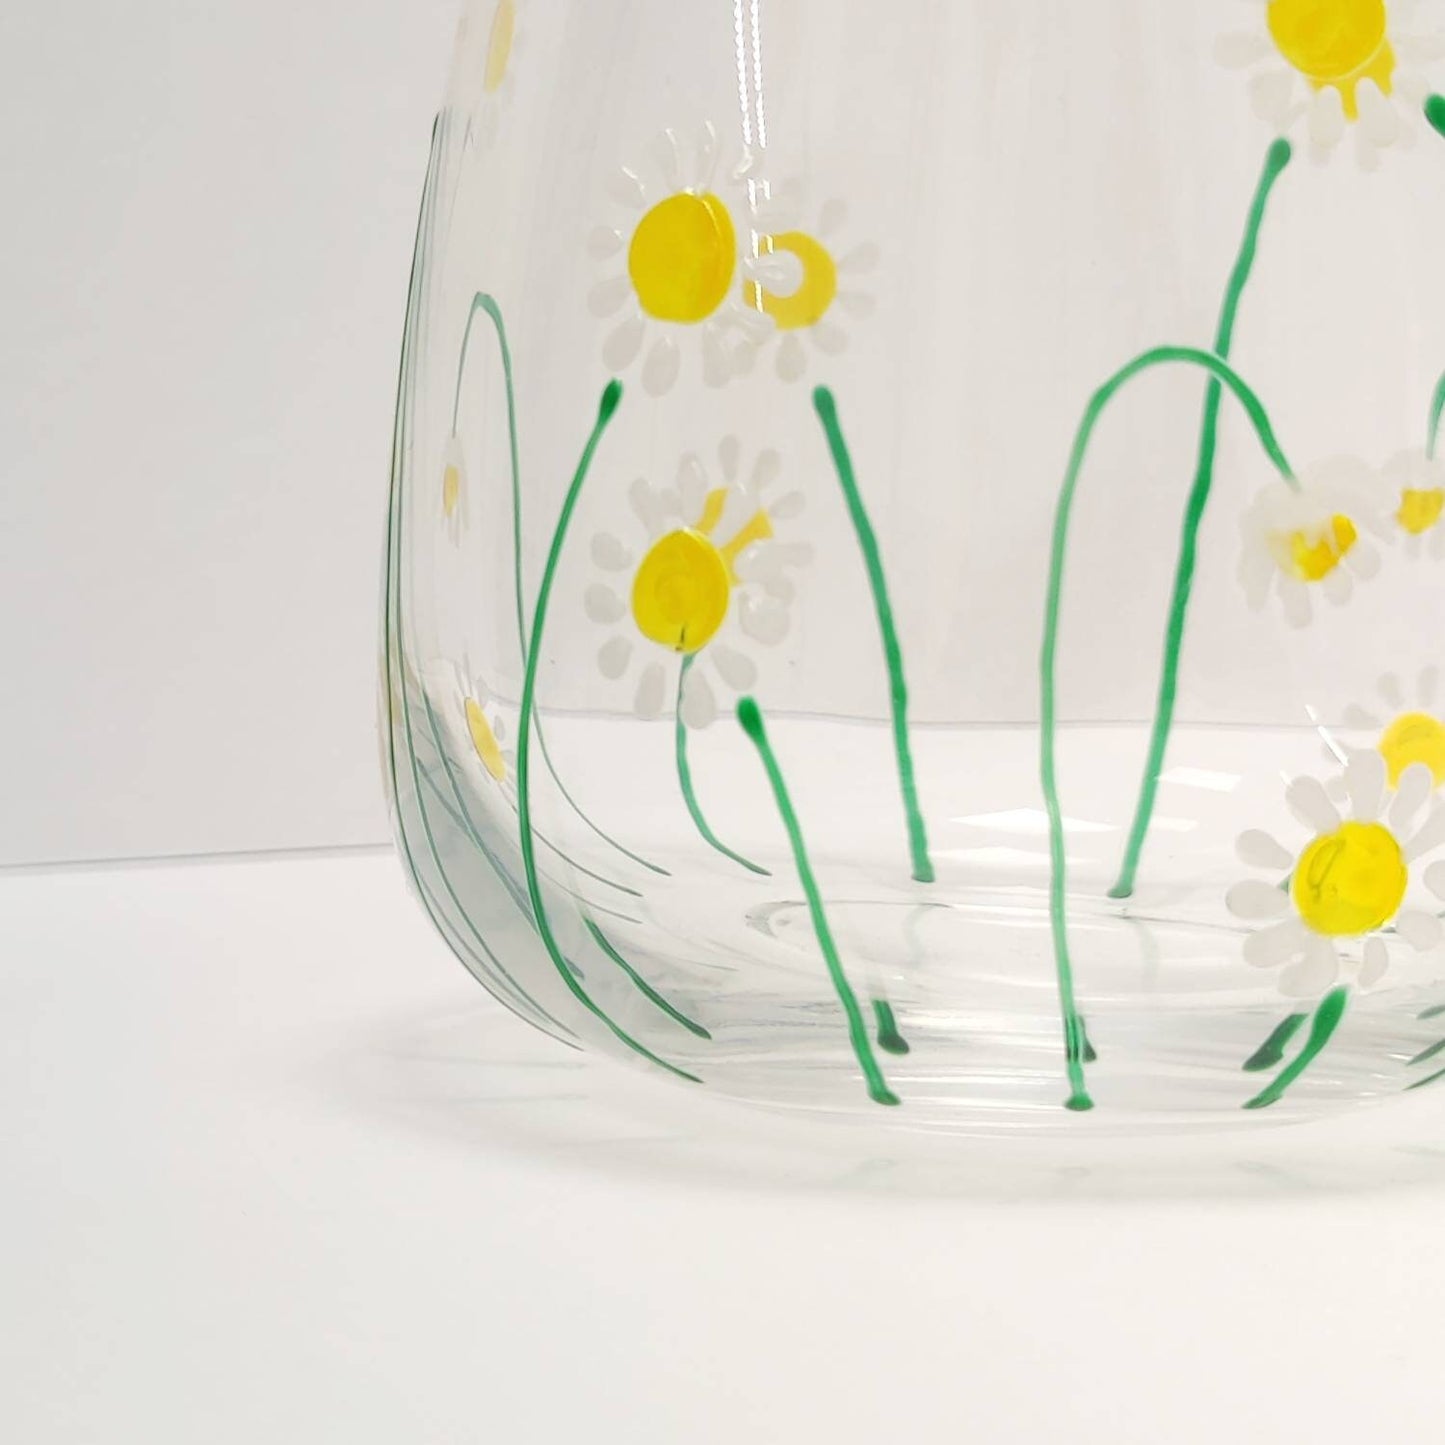 Hand-painted 'Daisy' design Stemless Wine Glass